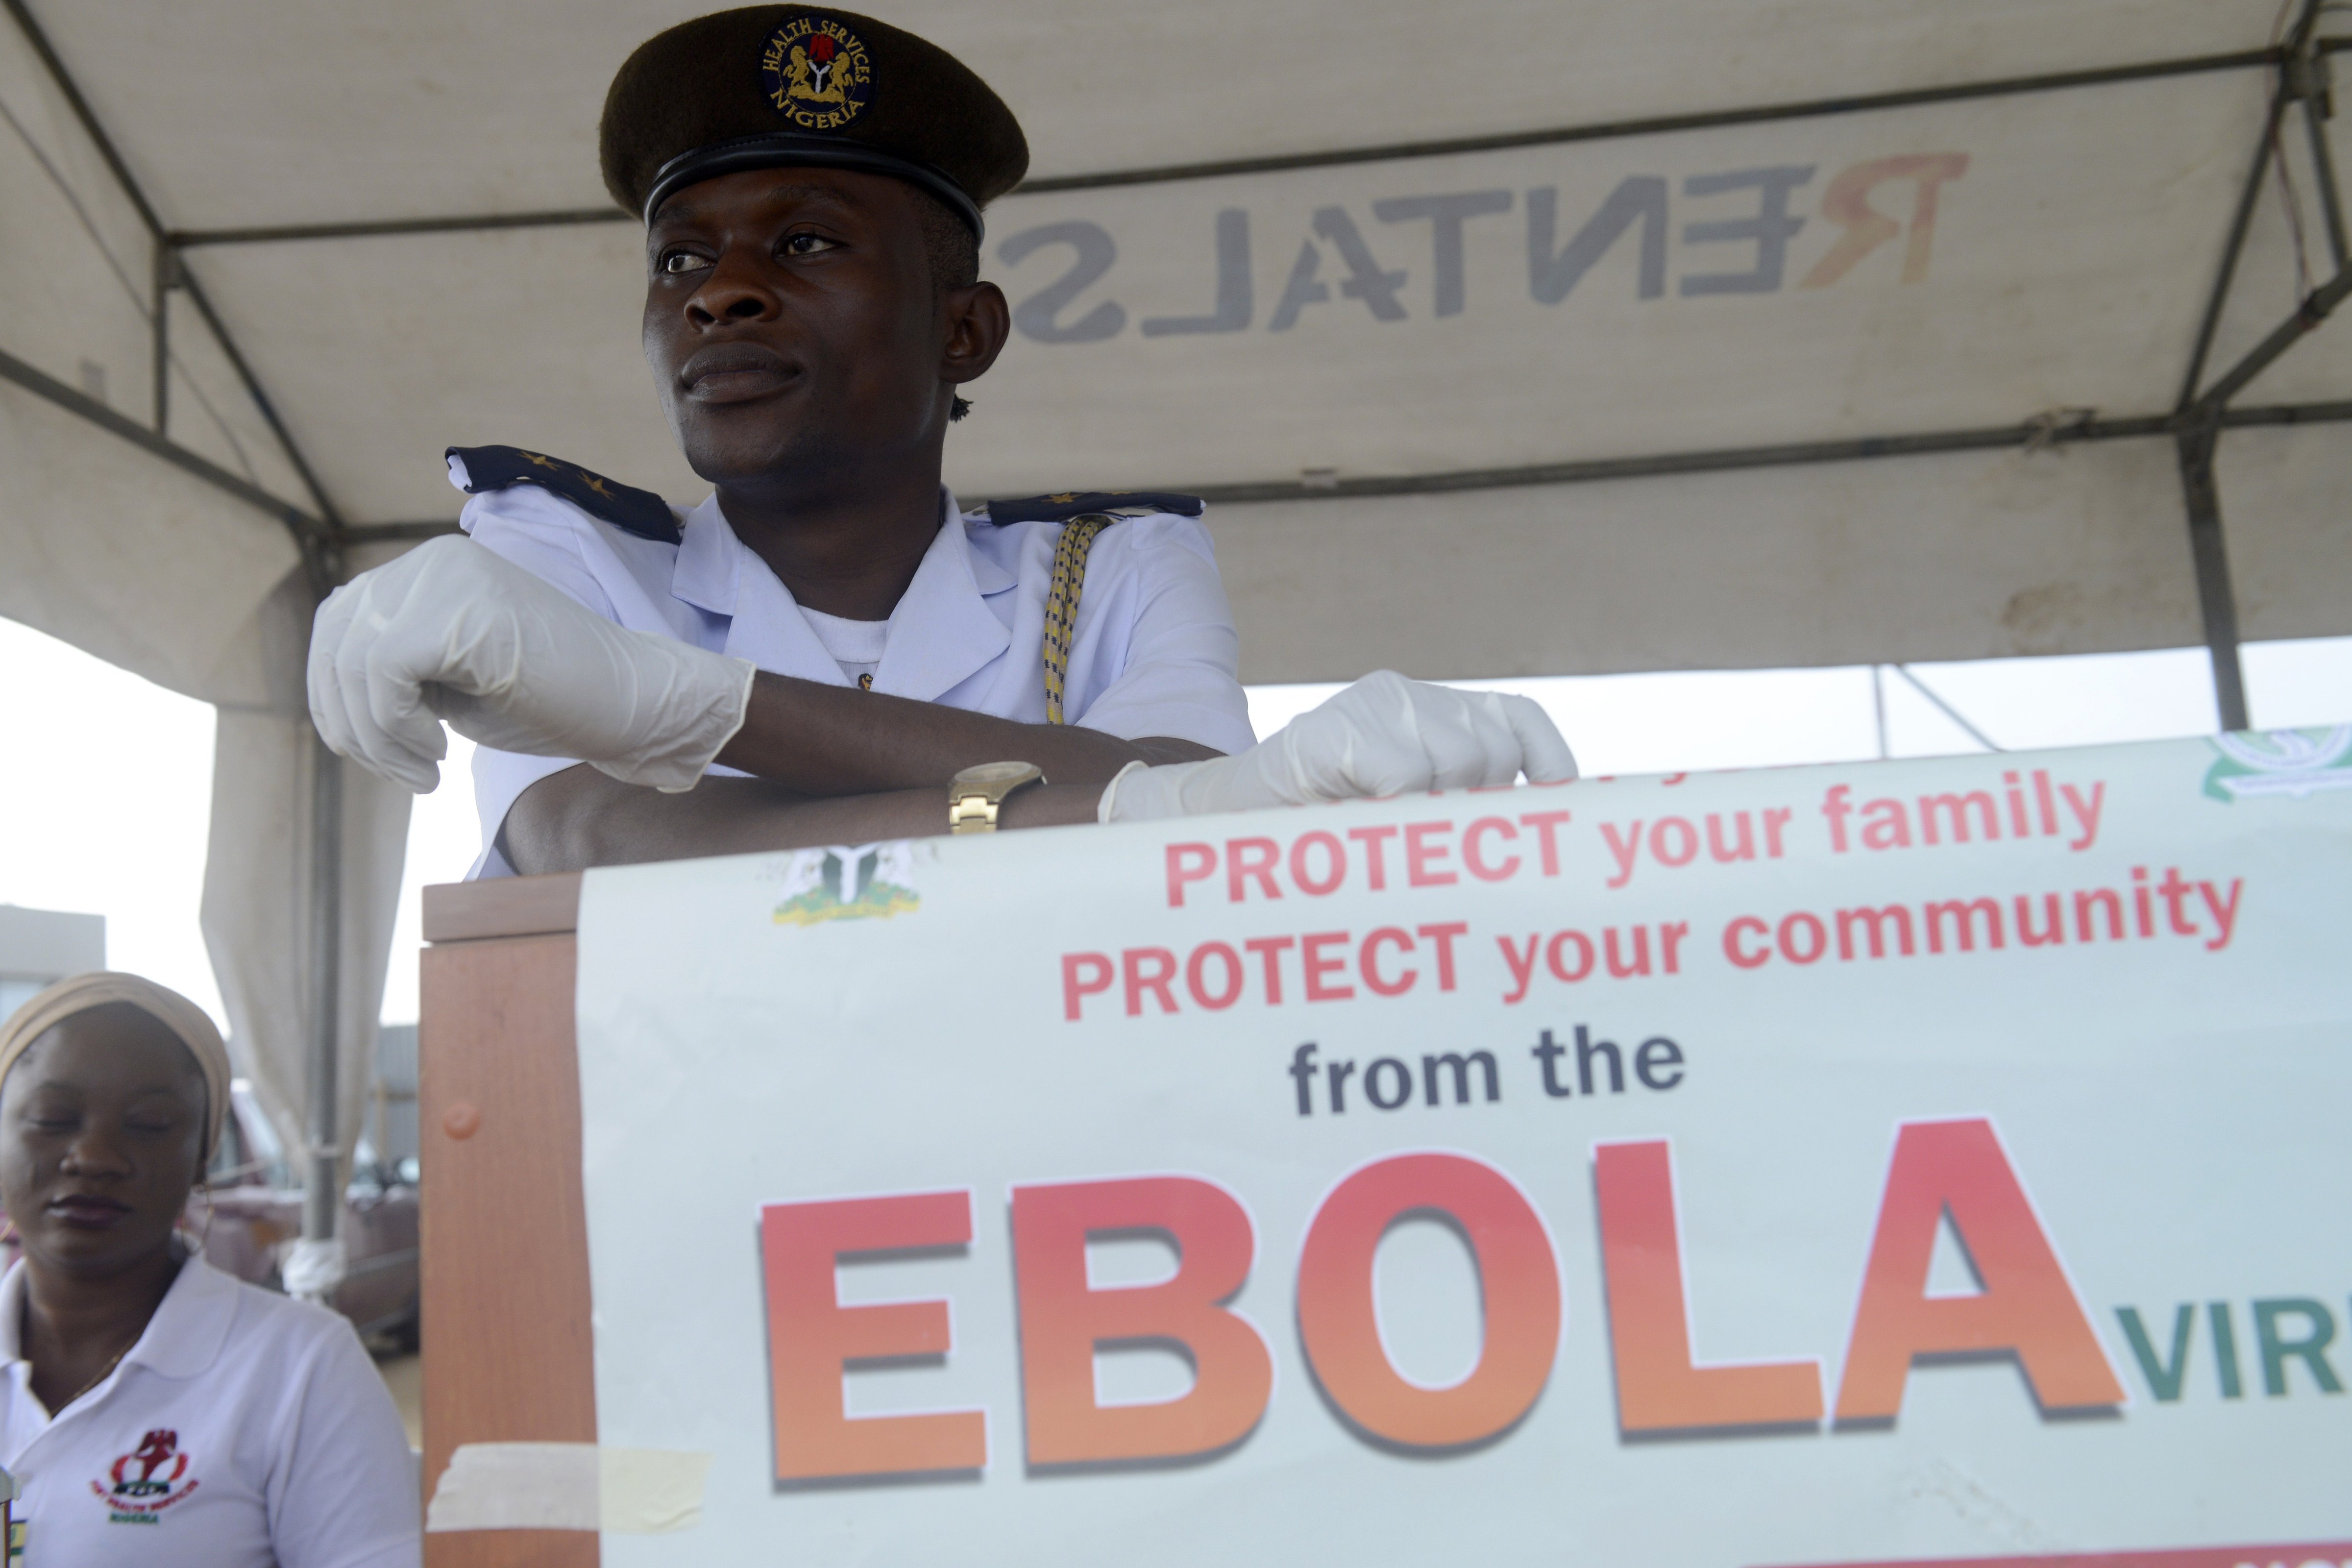 A health official waits to screen for the ebola virus Muslim faithfuls on pilgrimage to Mecca on September 19, 2014 at the Murtala Mohammed International Airport in Lagos. (Pius Utomi Ekpei&mdash;AFP/Getty Images)